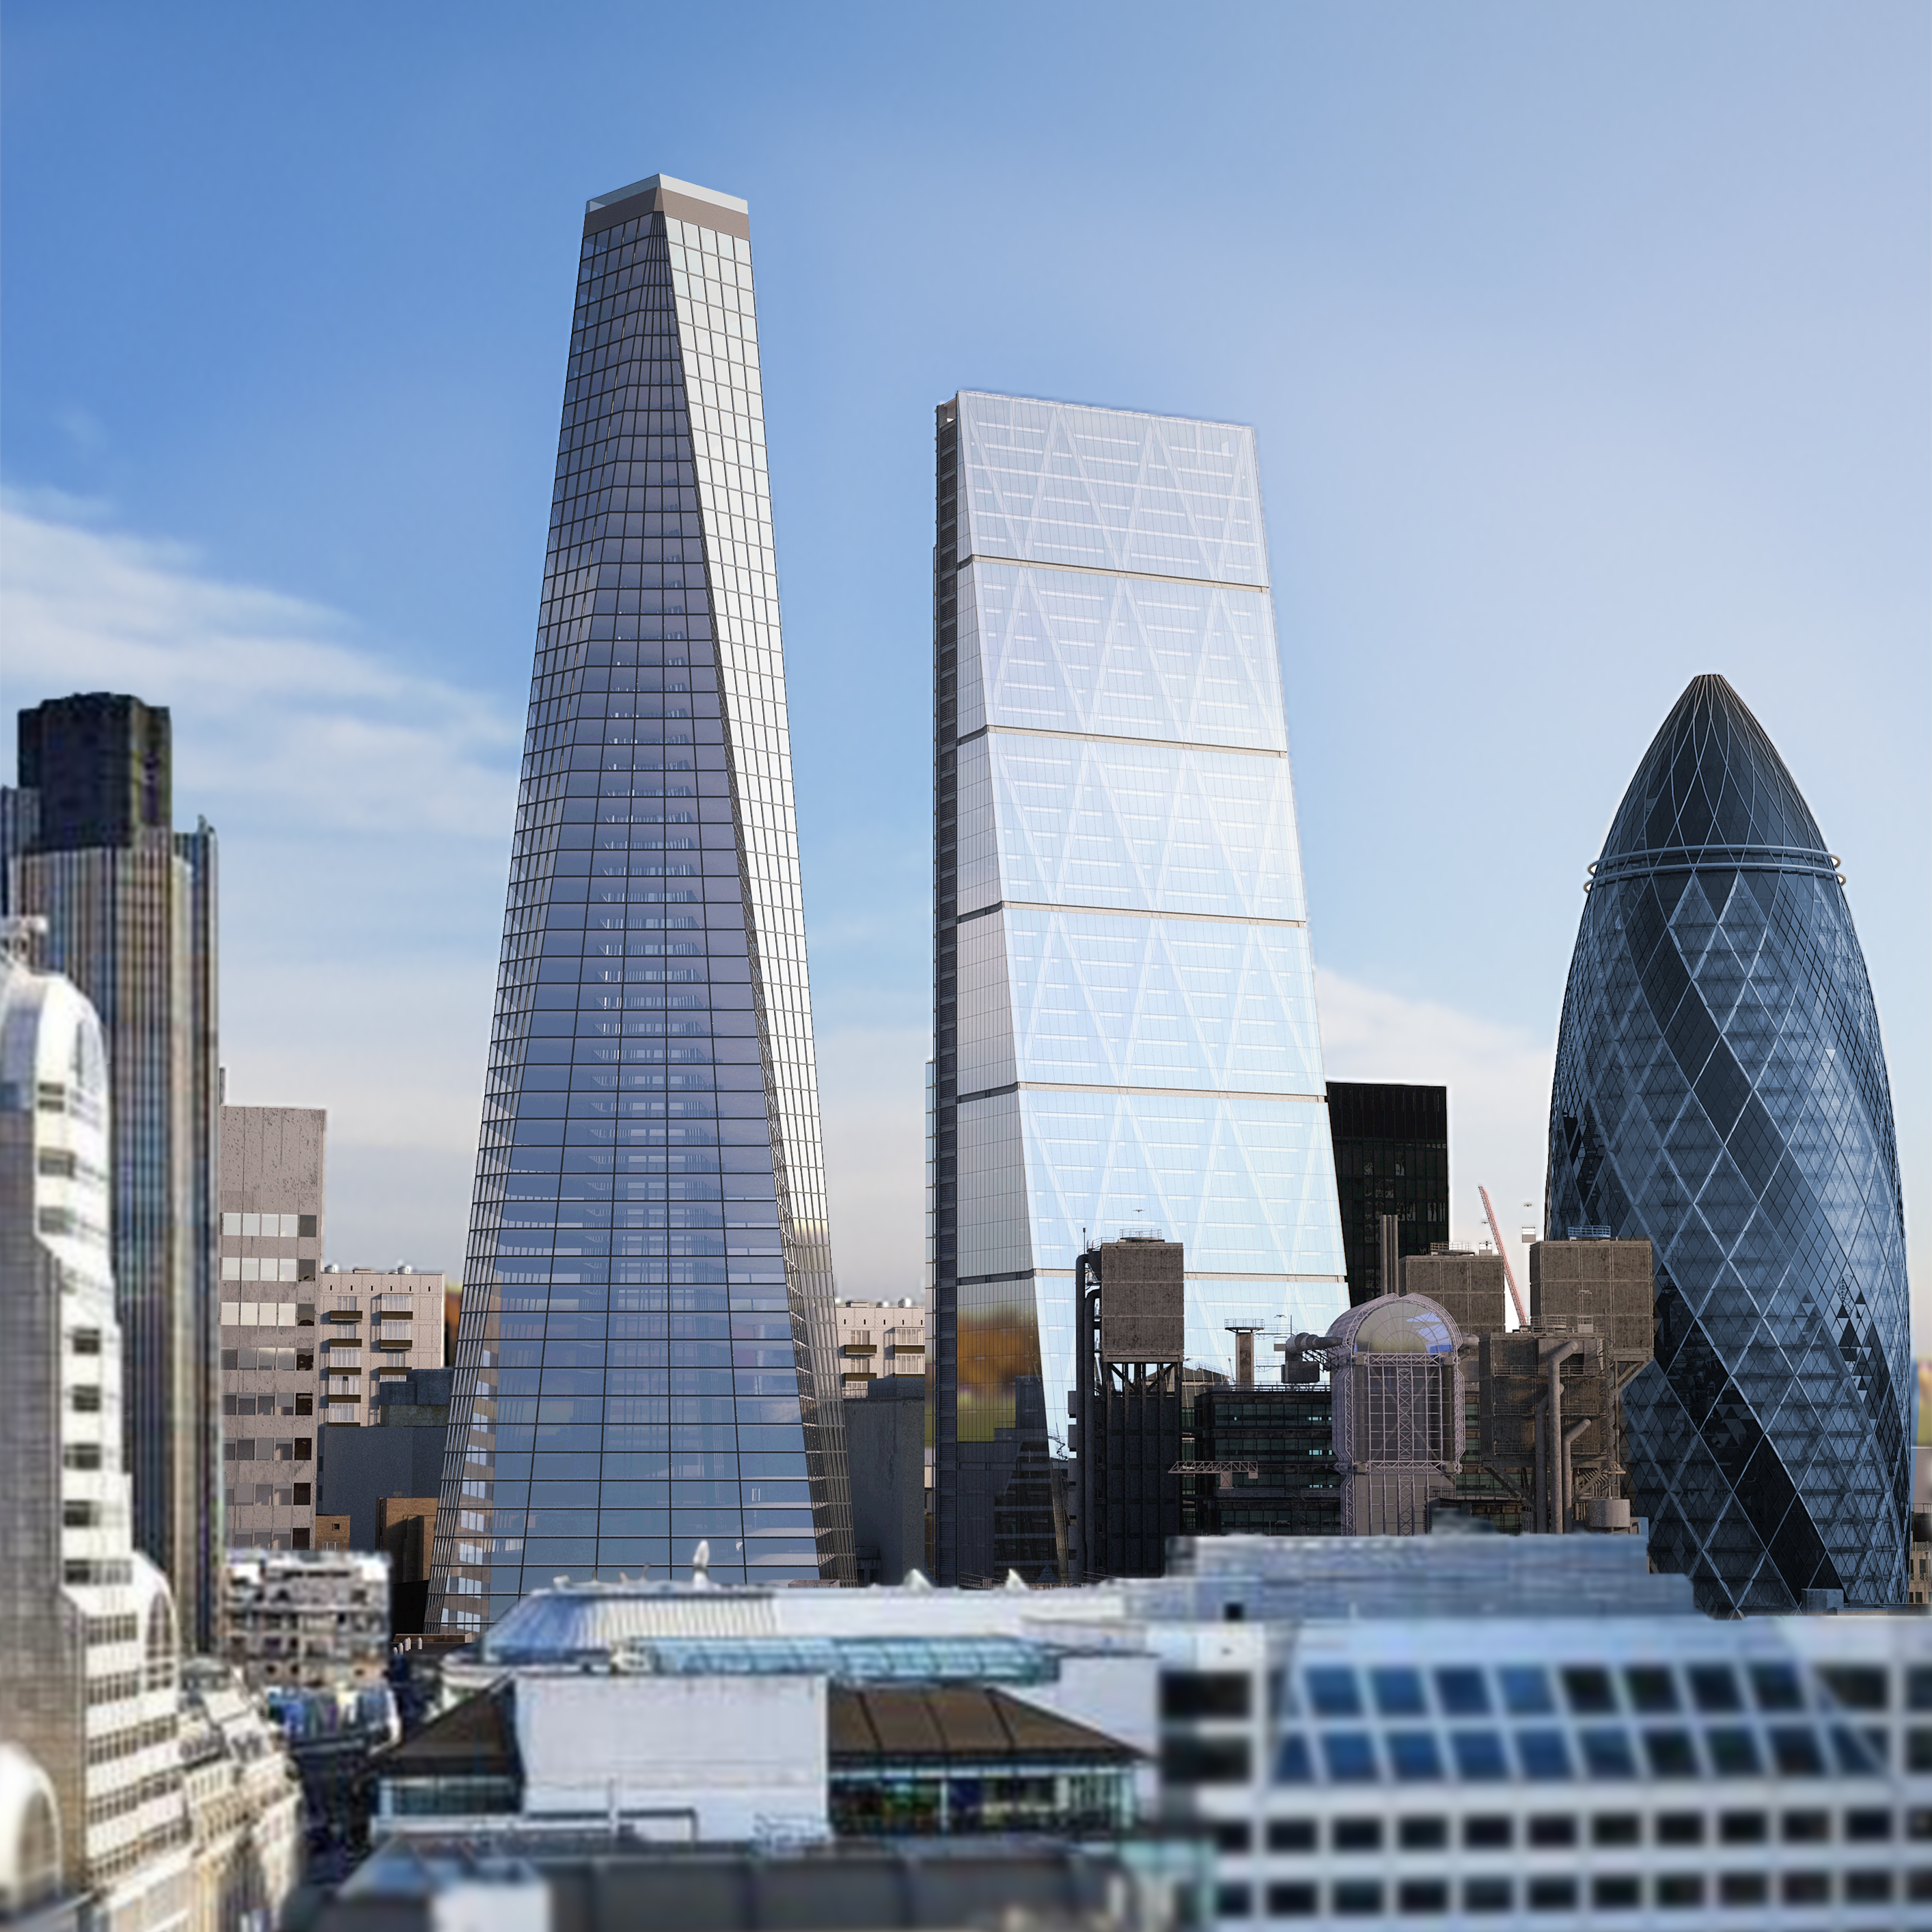 Swimmers will have a 360-degree view of the London skyline.